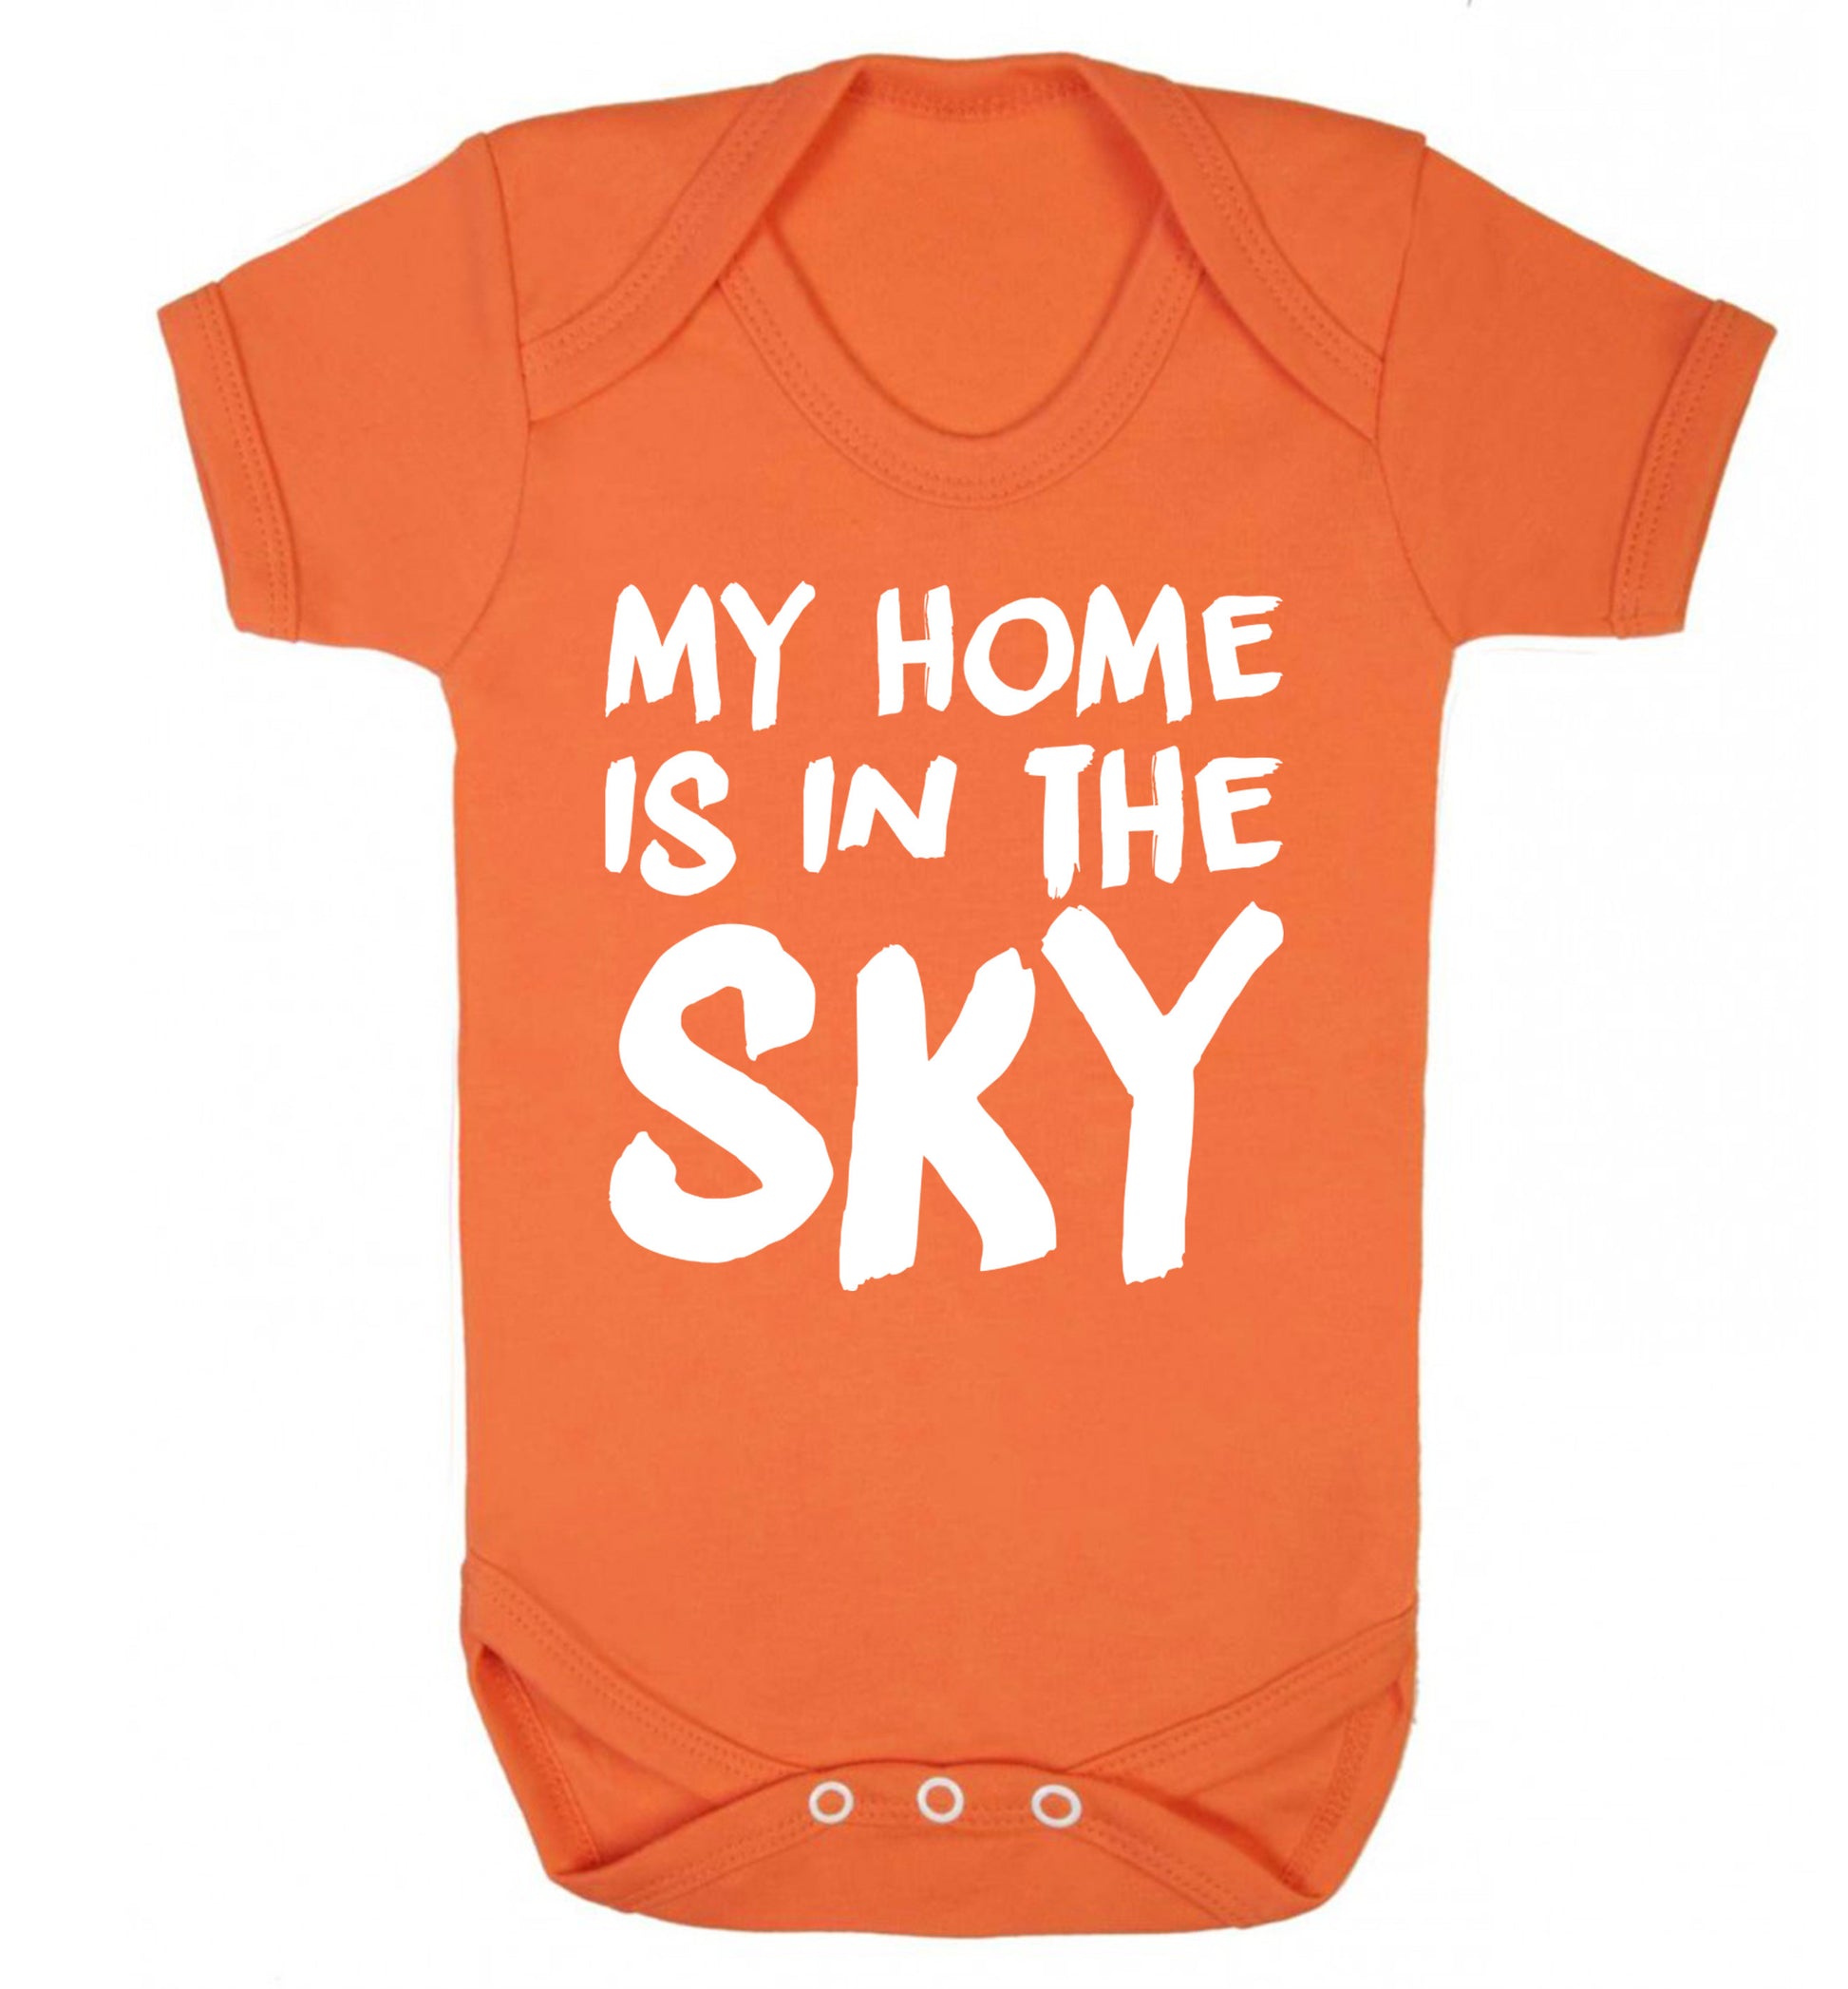 My home is in the sky Baby Vest orange 18-24 months